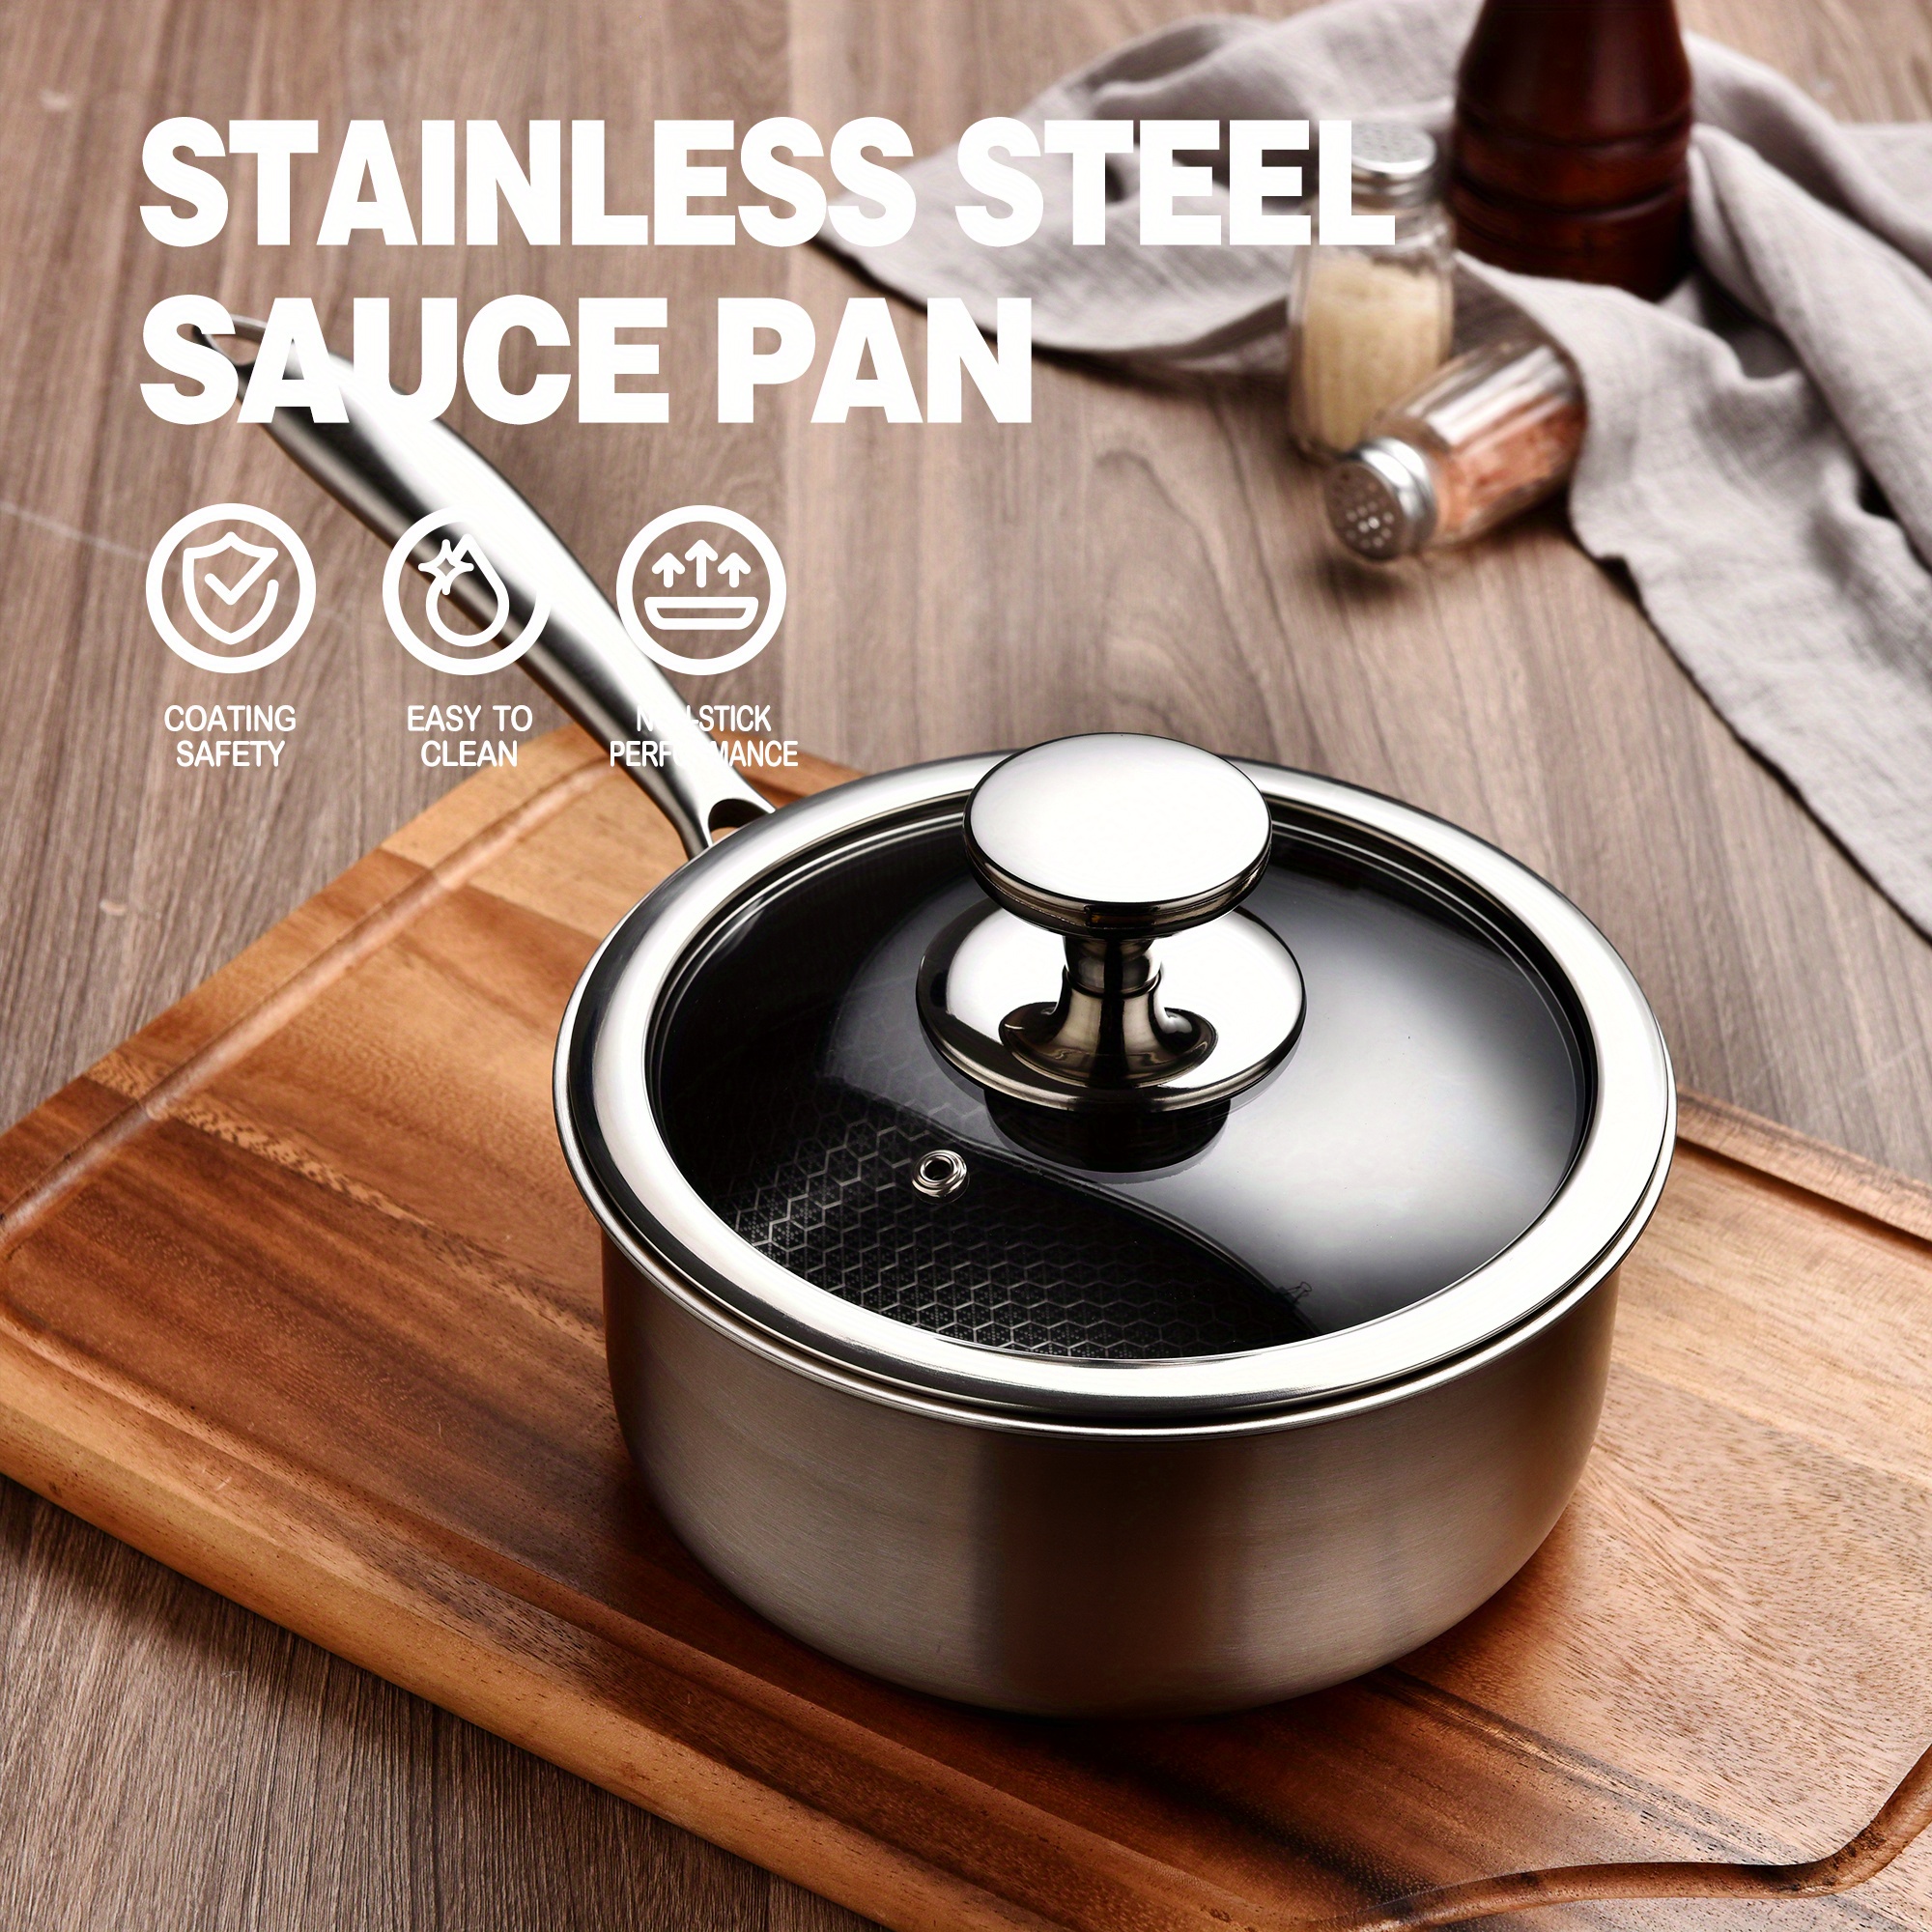 1.5 Quart Hybrid Stainless Steel Pot Saucepan With Glass Lid